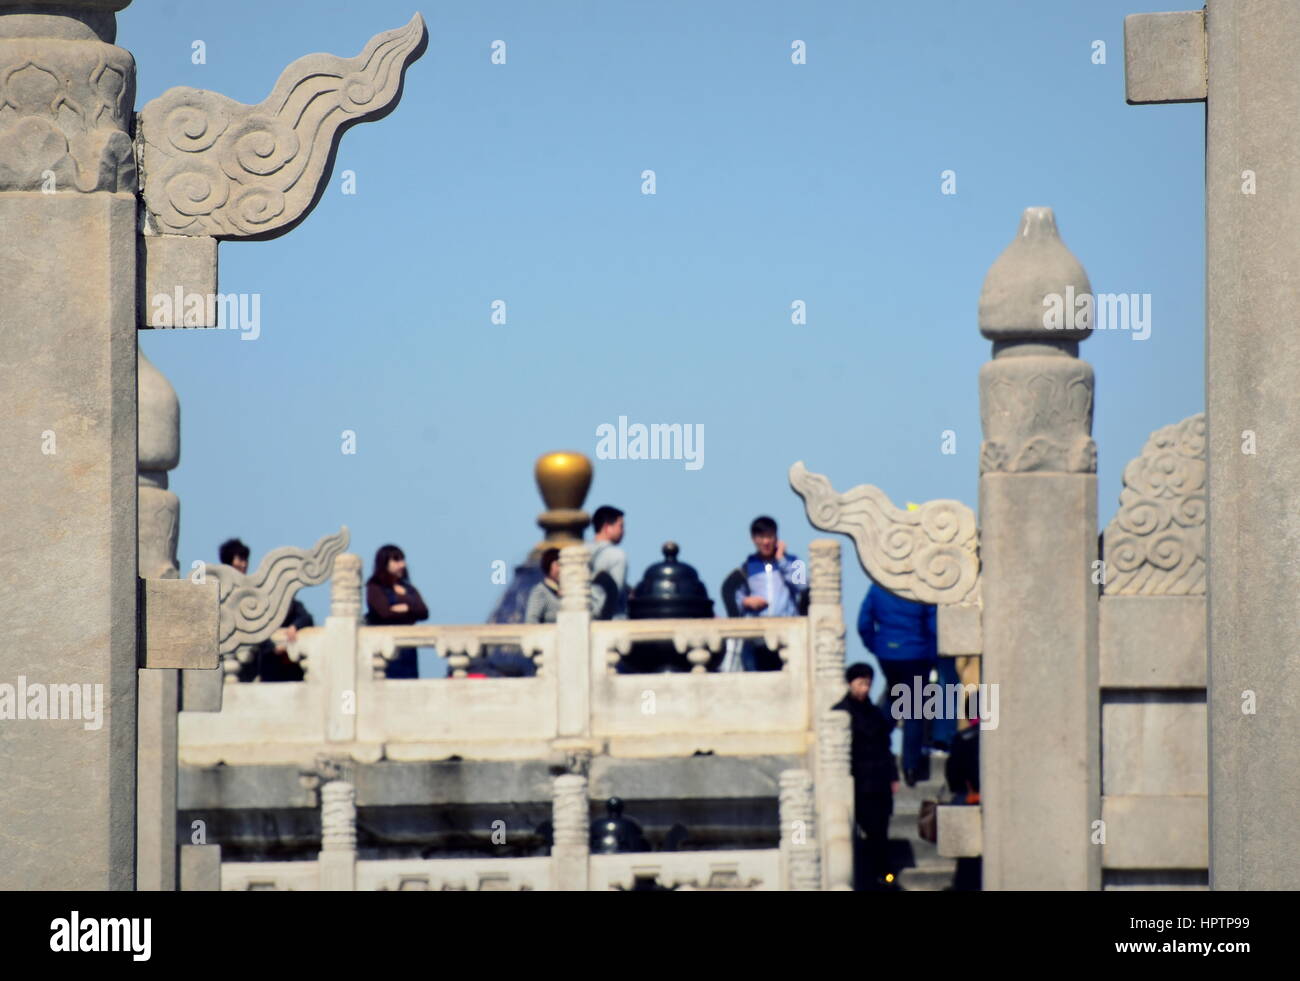 Successive portals and gates in traditional Chinese architecture leadinto the Temple of Heaven altar with Chinese visitors on its top - Beijing, China Stock Photo